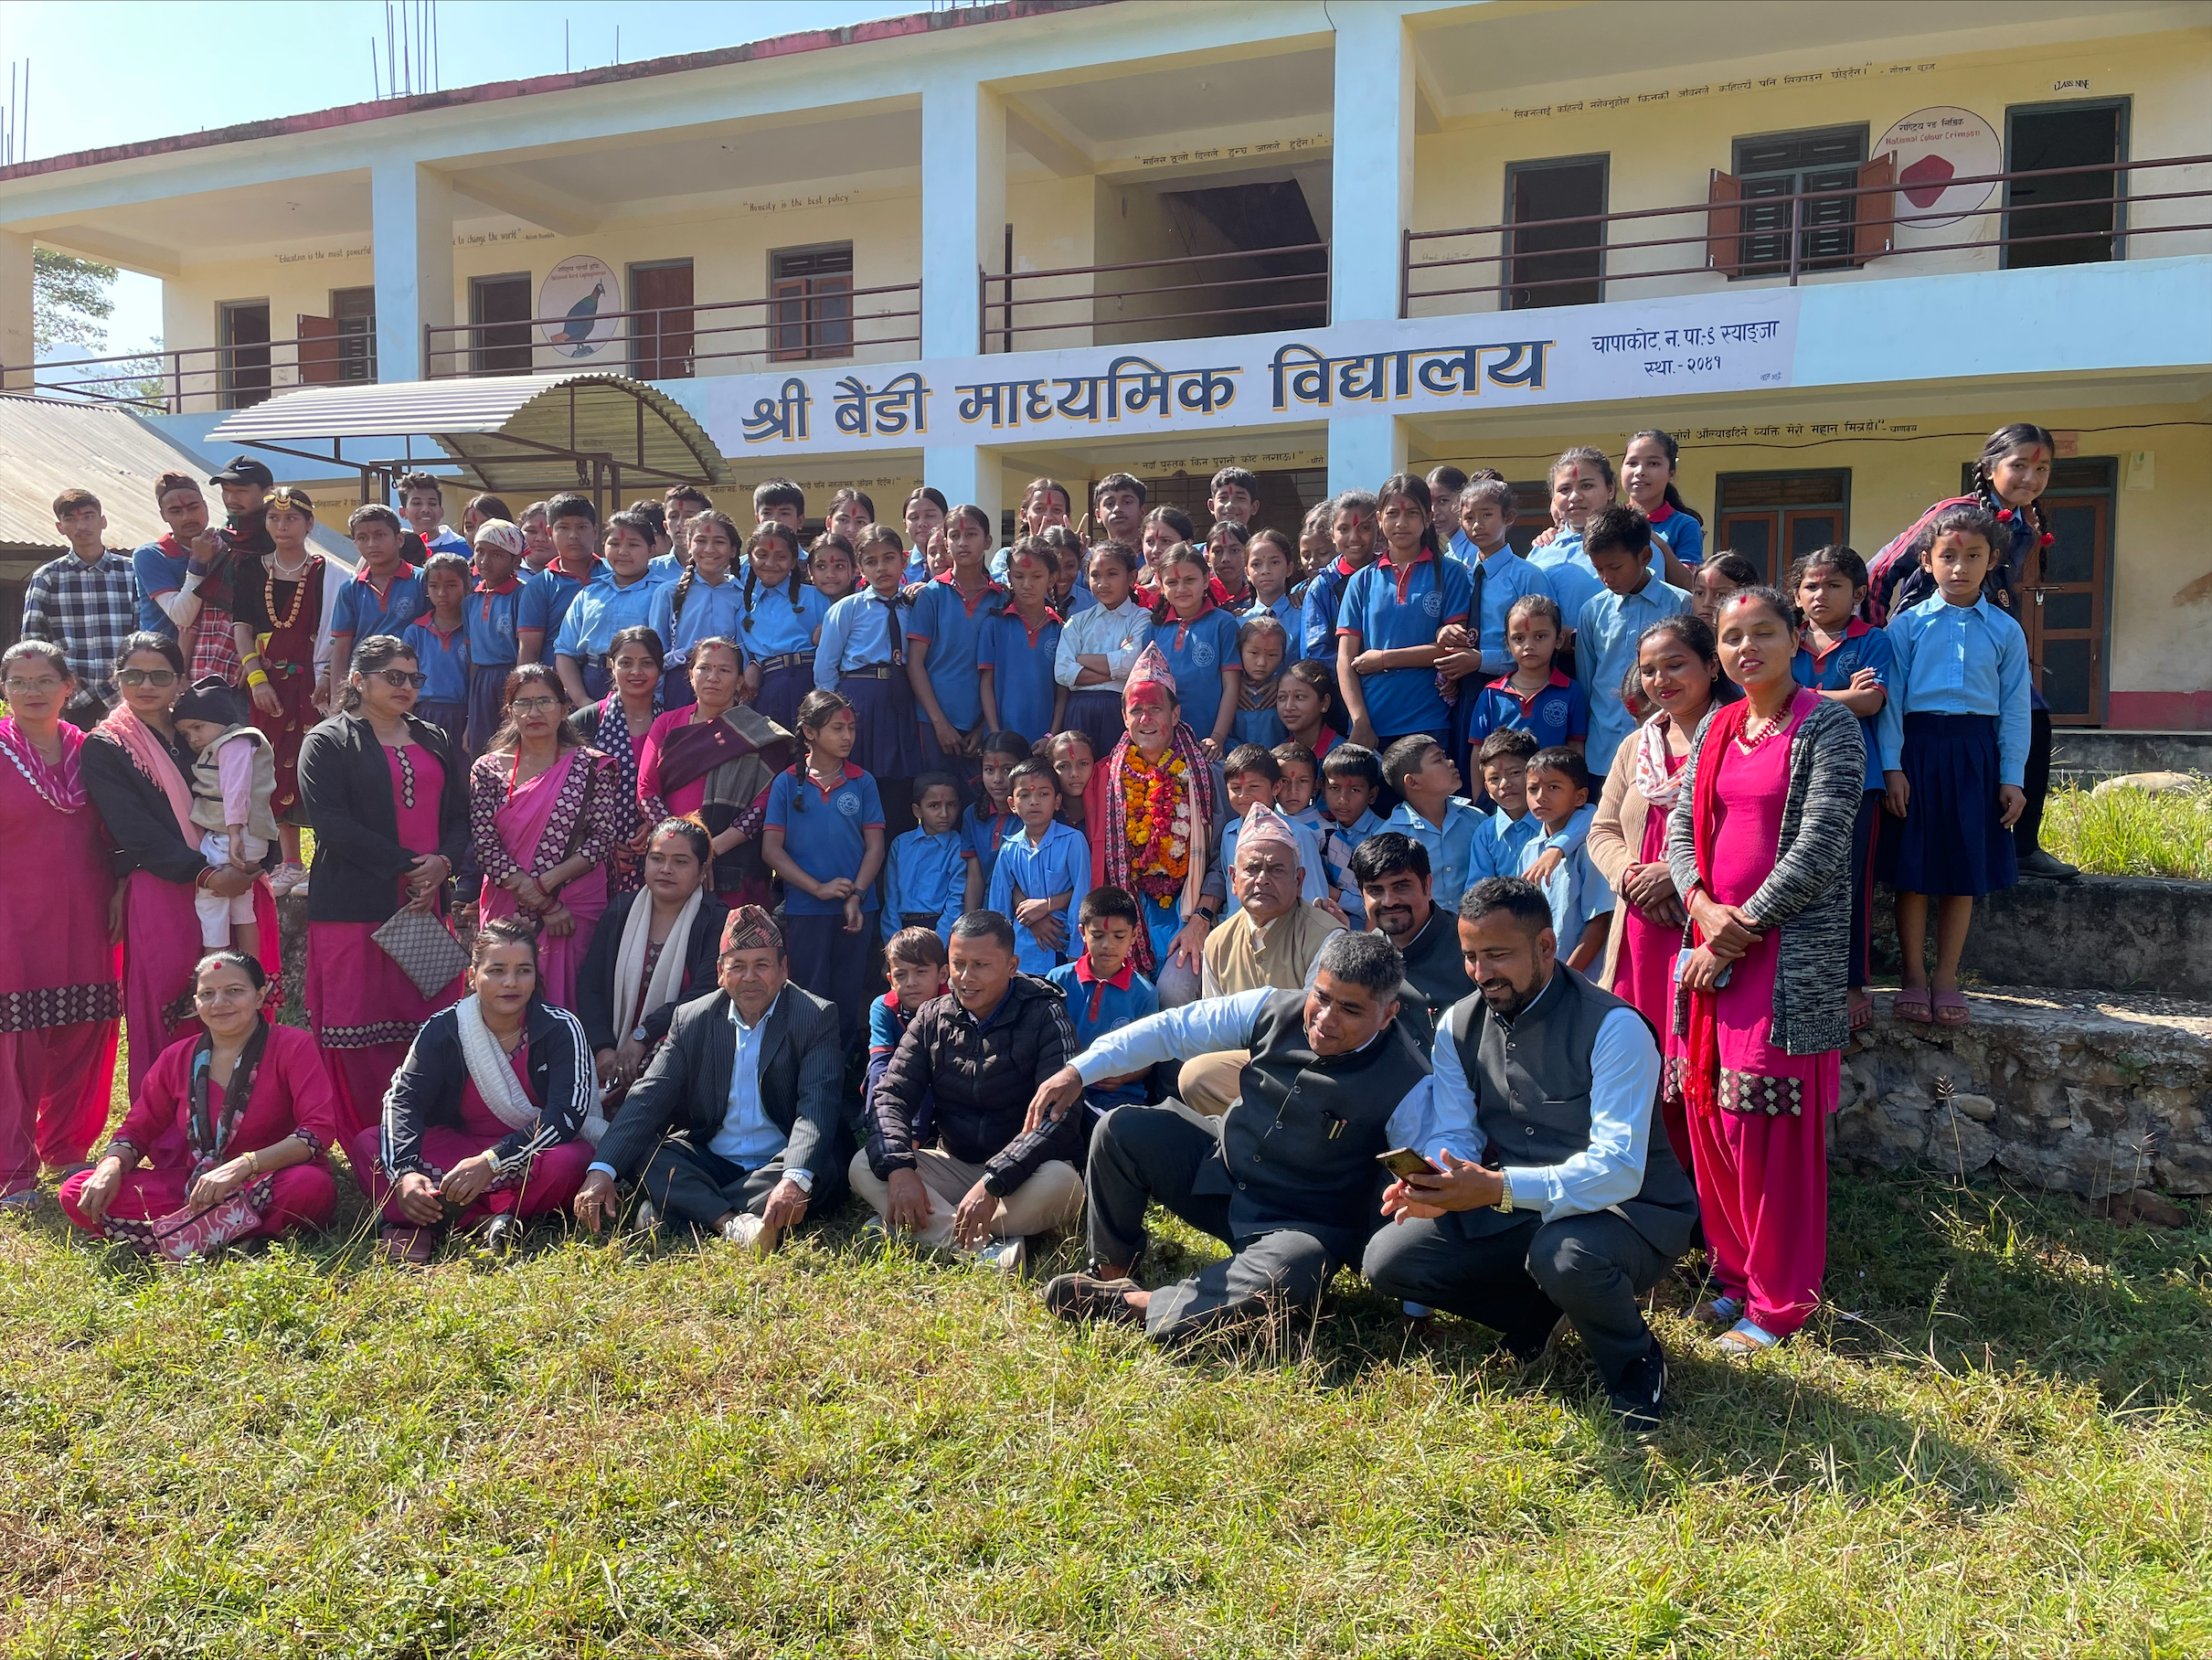 This is a photo of a group of students and staff standing outside a school in Nepal.